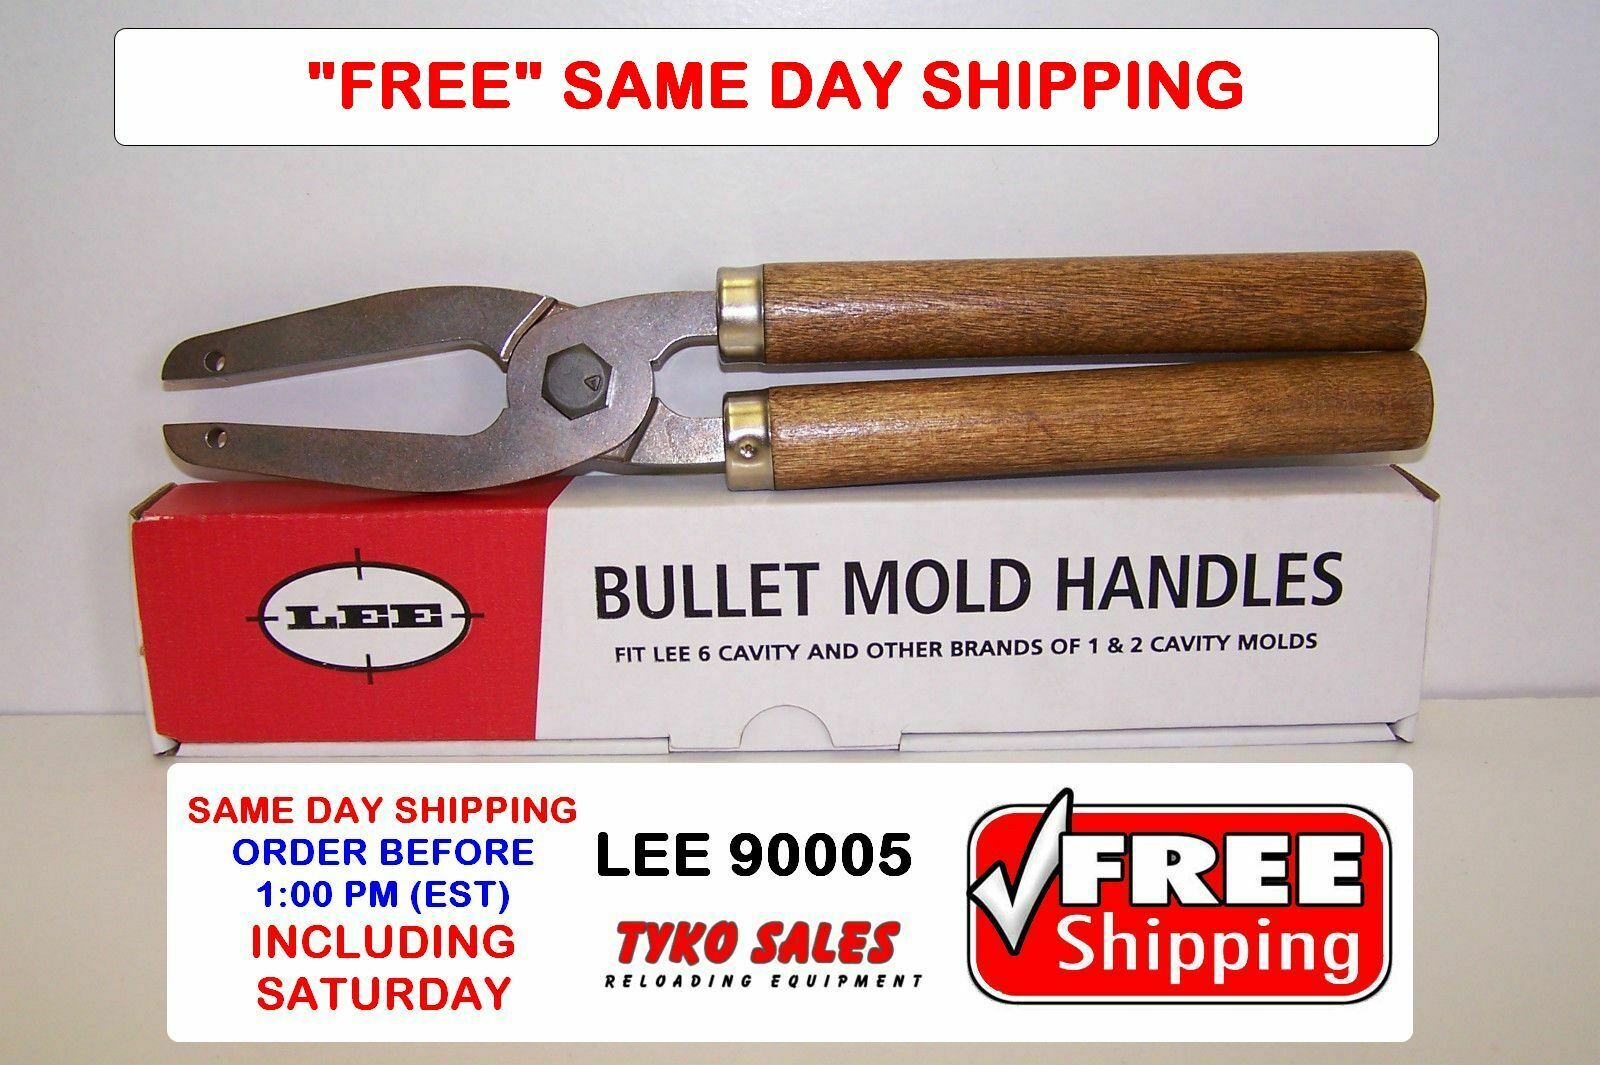 Lee 90005 * Lee 6 Cavity Mold Handles * Also Fits 2-cavity Rcbs, Lyman & Others